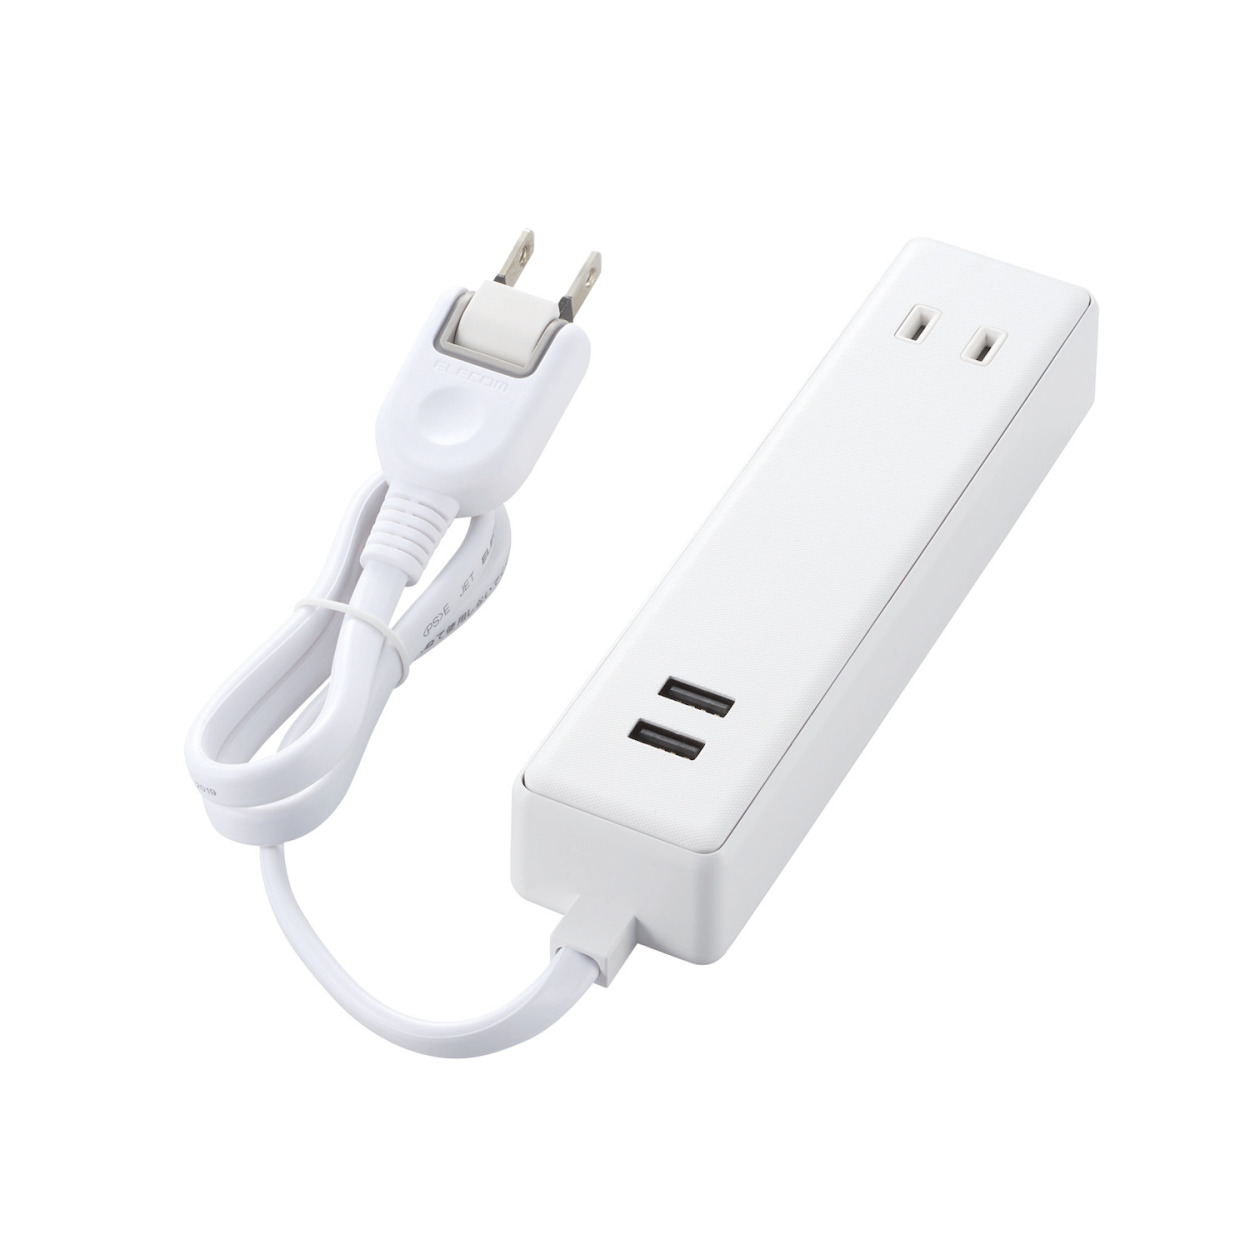 Mobile USB Power Strip (Cable)